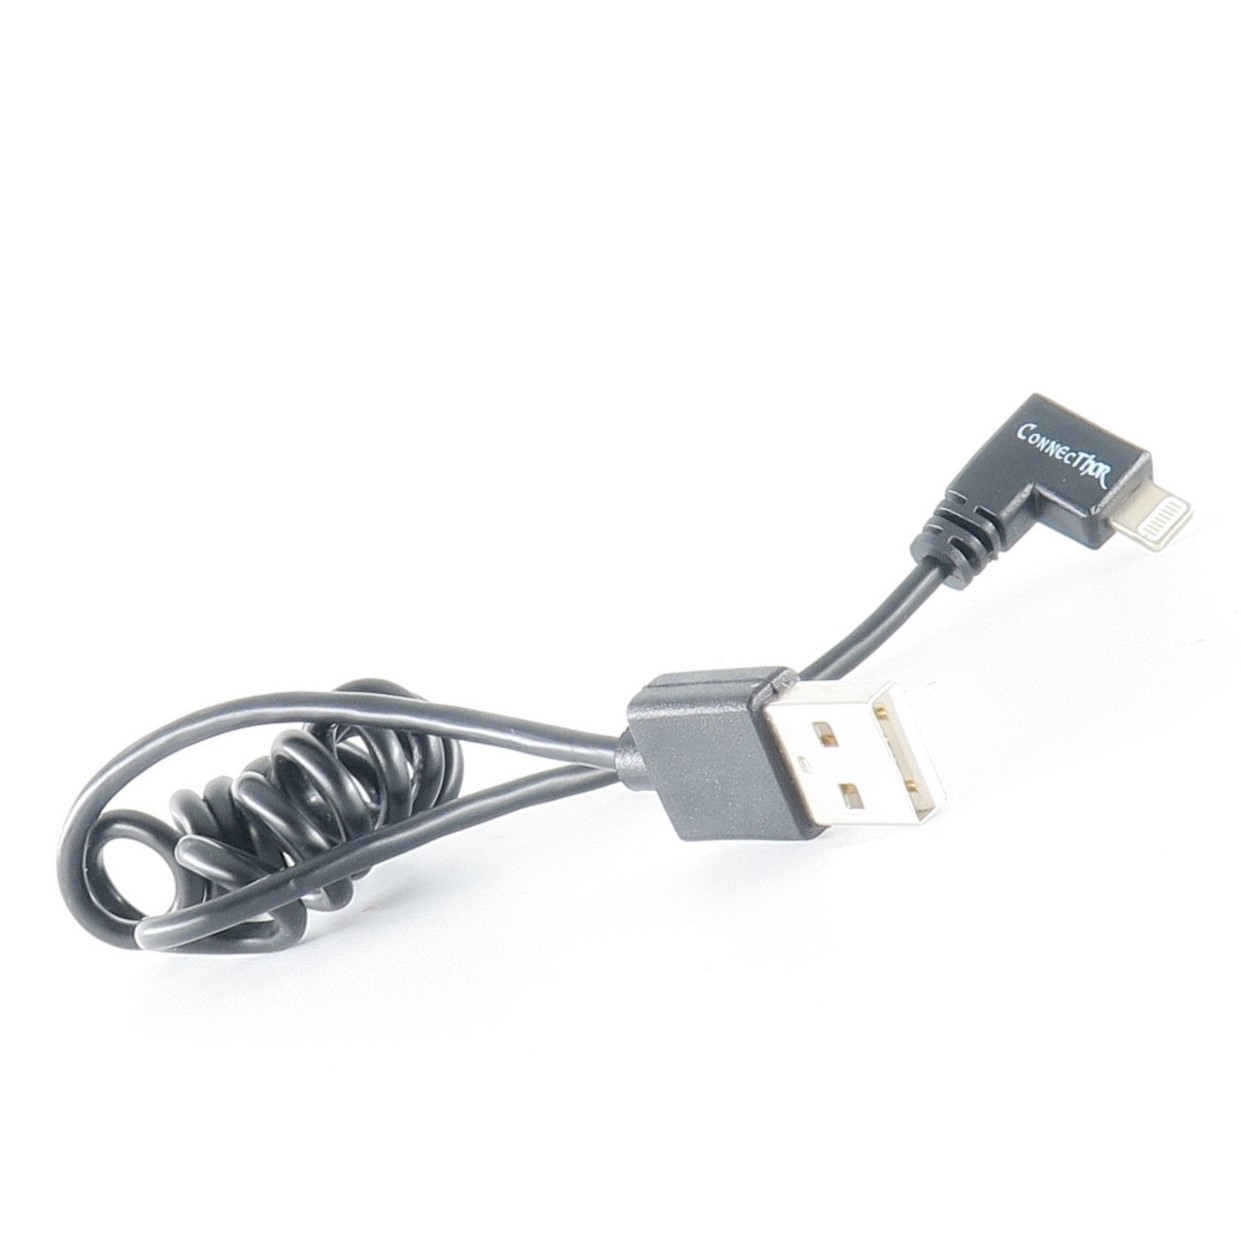 ConnecThor cable - USB 2.0 to lightning for DJI Drones